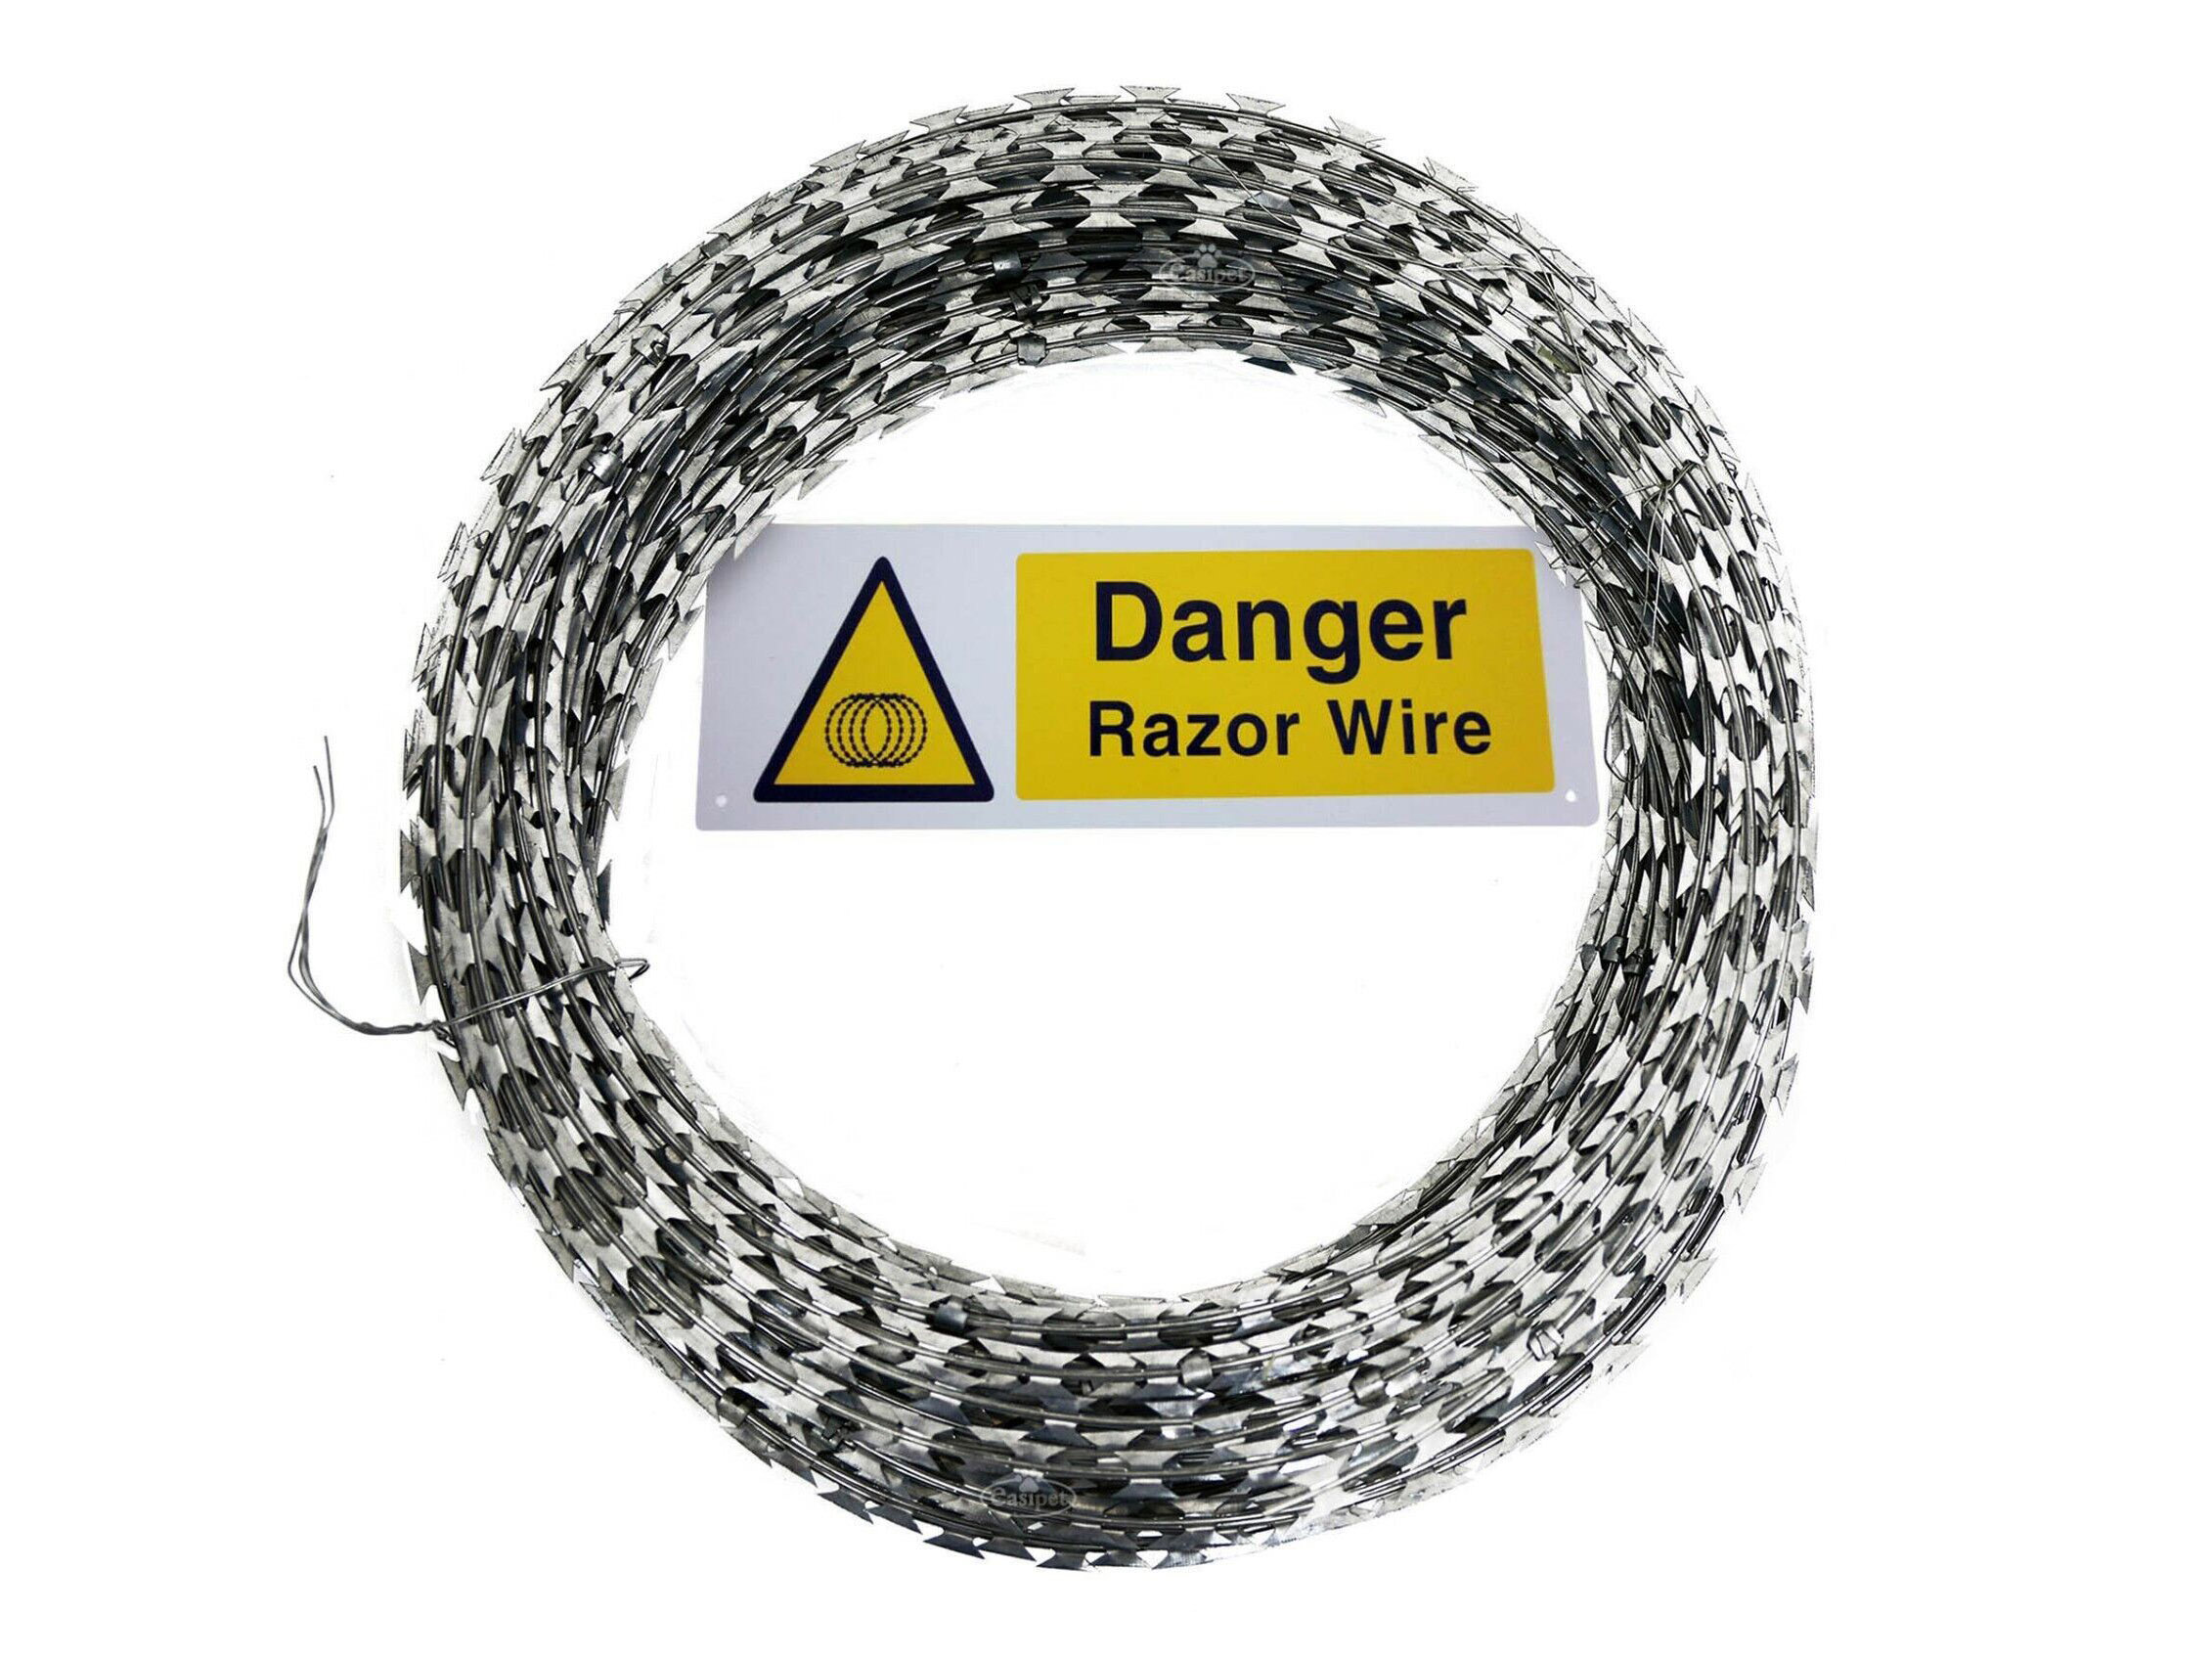 9-razor wire coil with warning sign packed into carton box